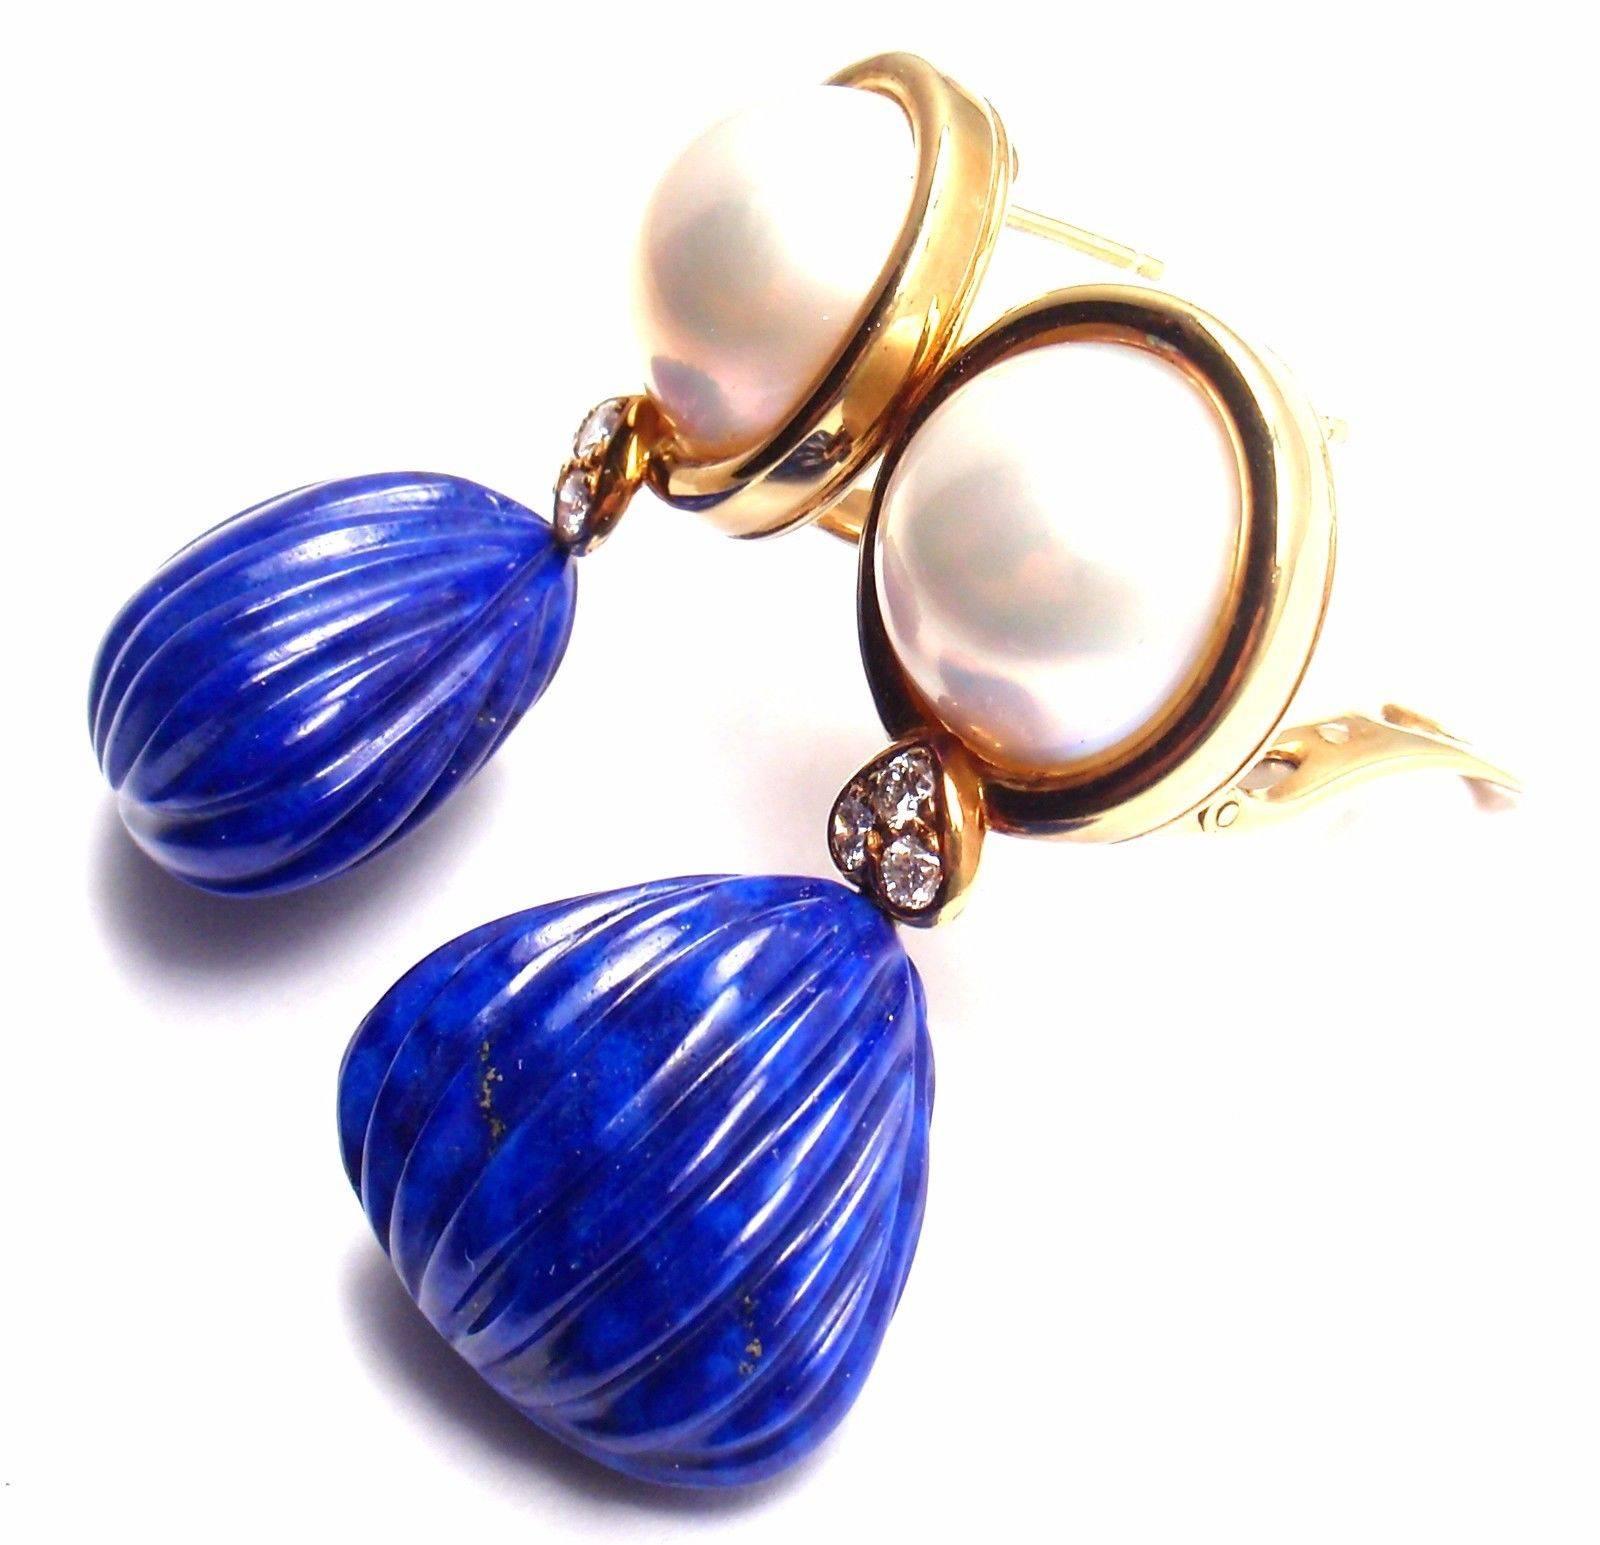 18k Yellow Gold Diamond Lapis Lazuli Mobe Pearl Earrings by Christian Dior. 
With 6 round brilliant cut diamonds VS1 clarity, G color total weight approx. .60ct
2 mabe pearls 15mm each
2 large carved lapis lazuli stones 21mm x 17mm

Details:
Weight: